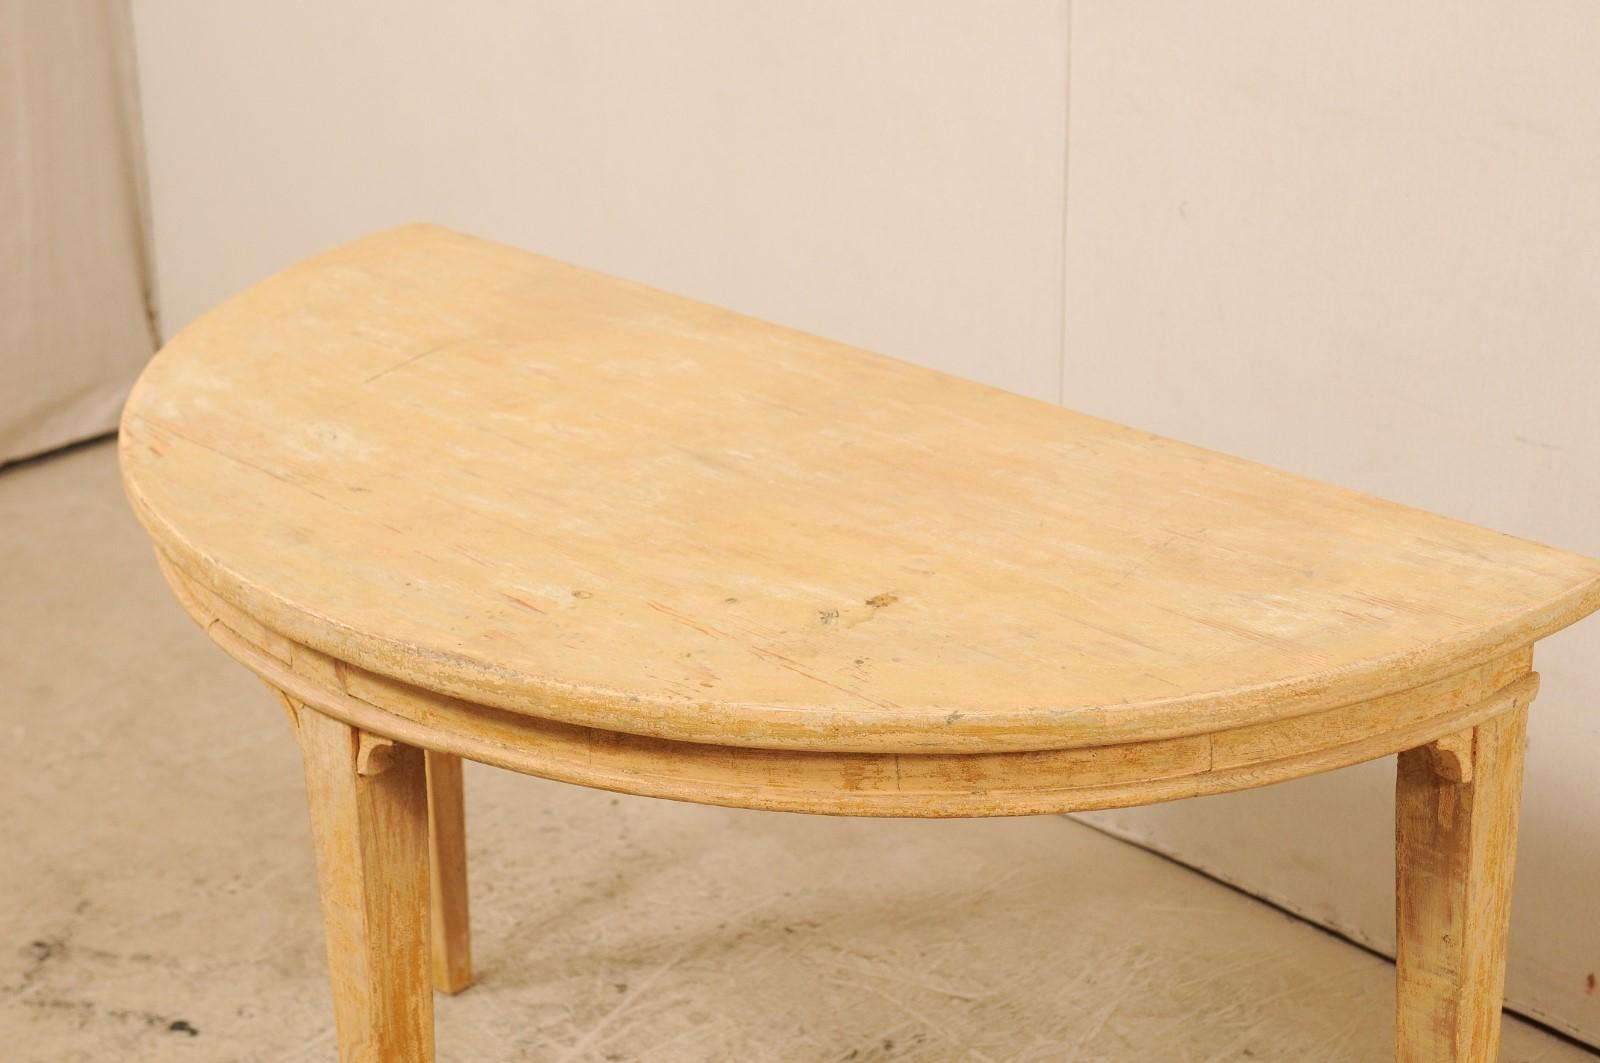 Single Swedish Demilune Light Wood Table from the 19th Century 4